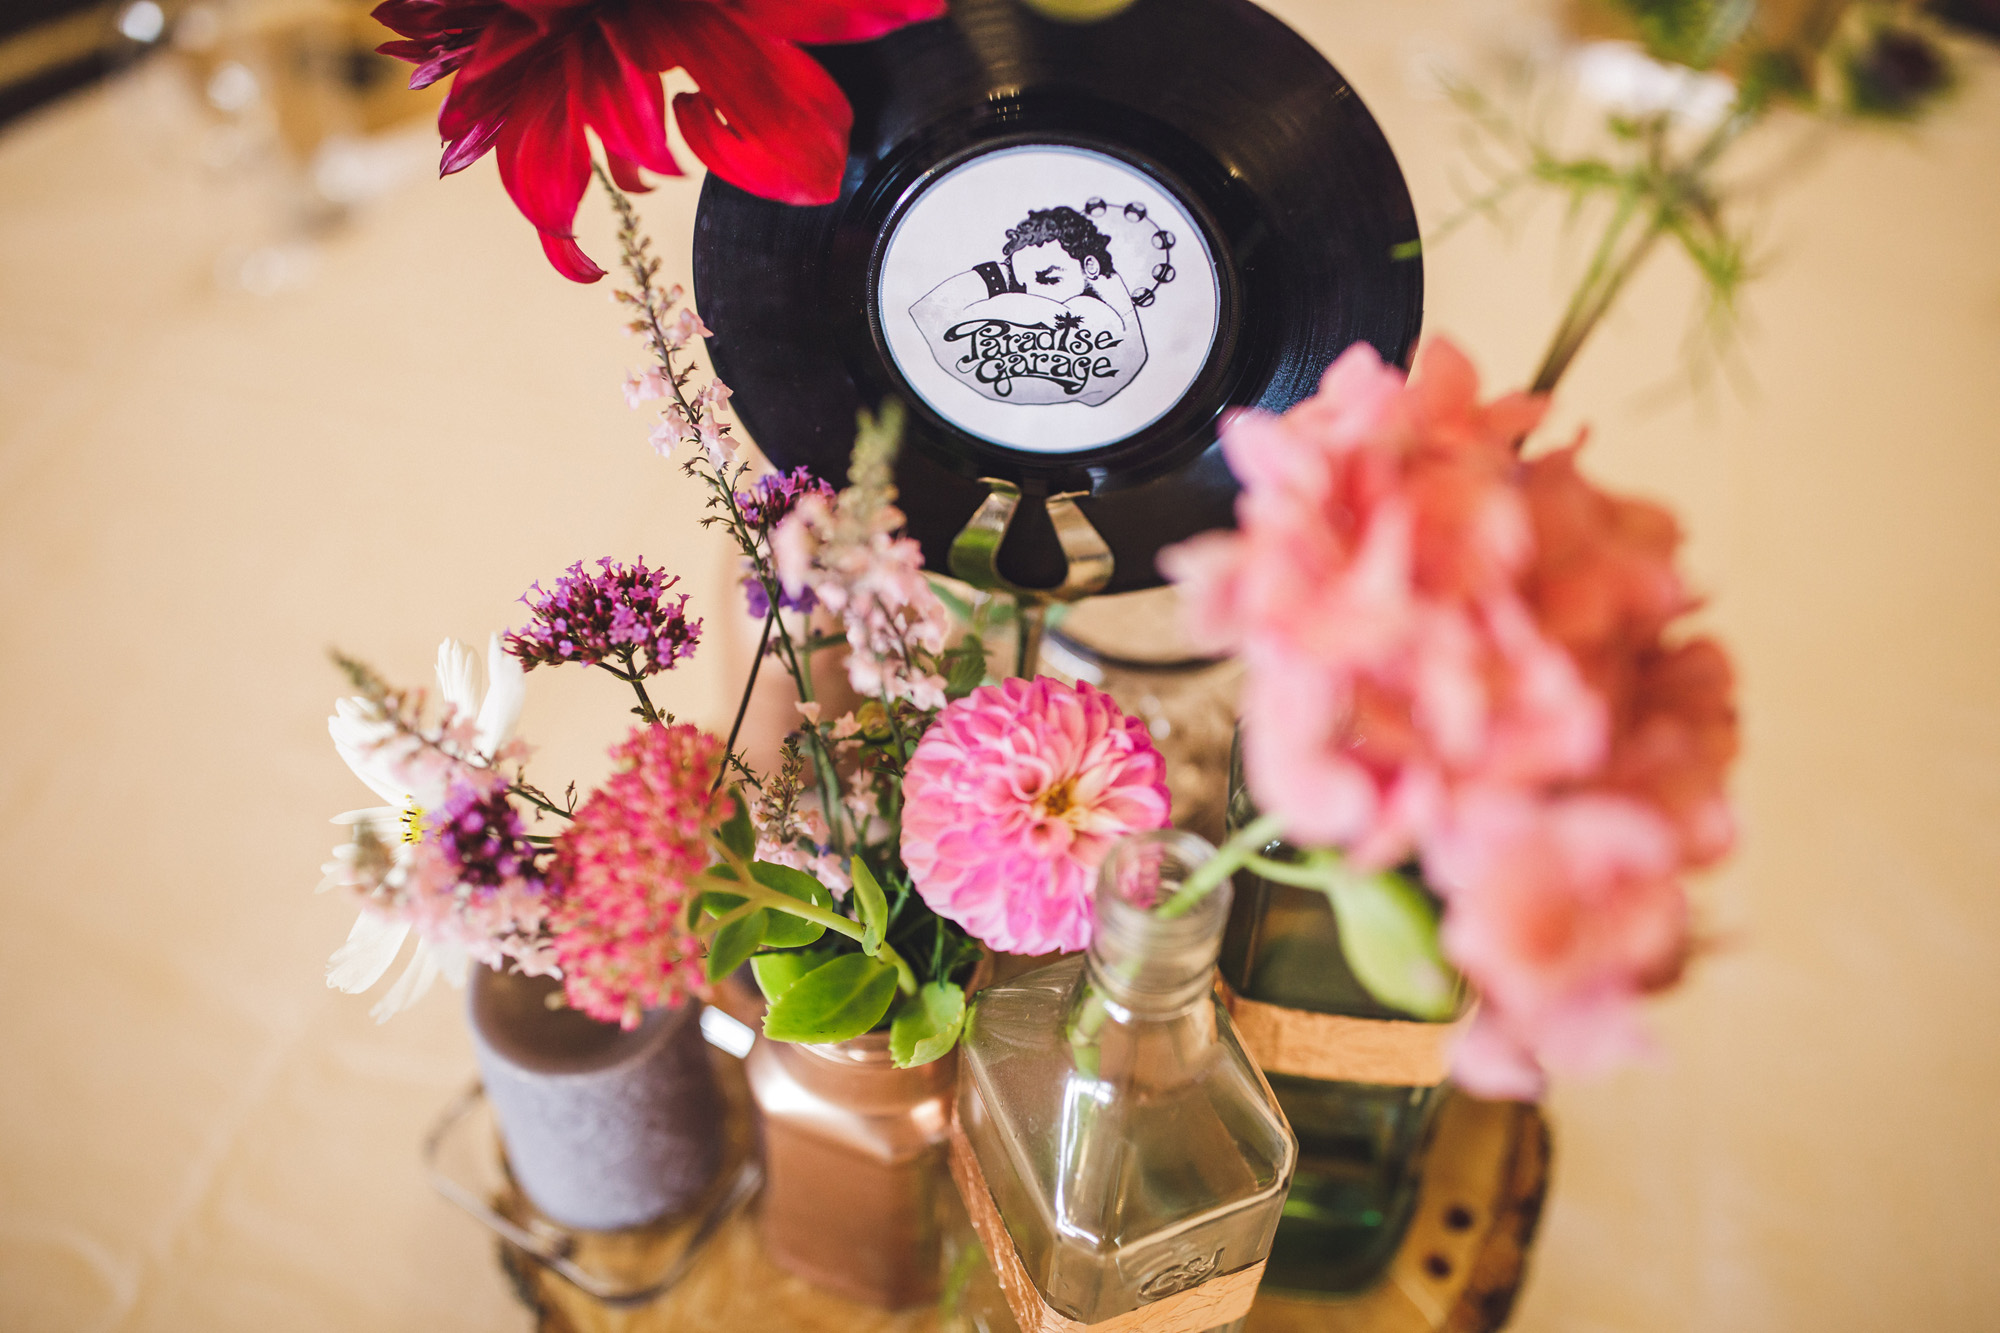 11 A 70s boho bride and her music inspired farm wedding